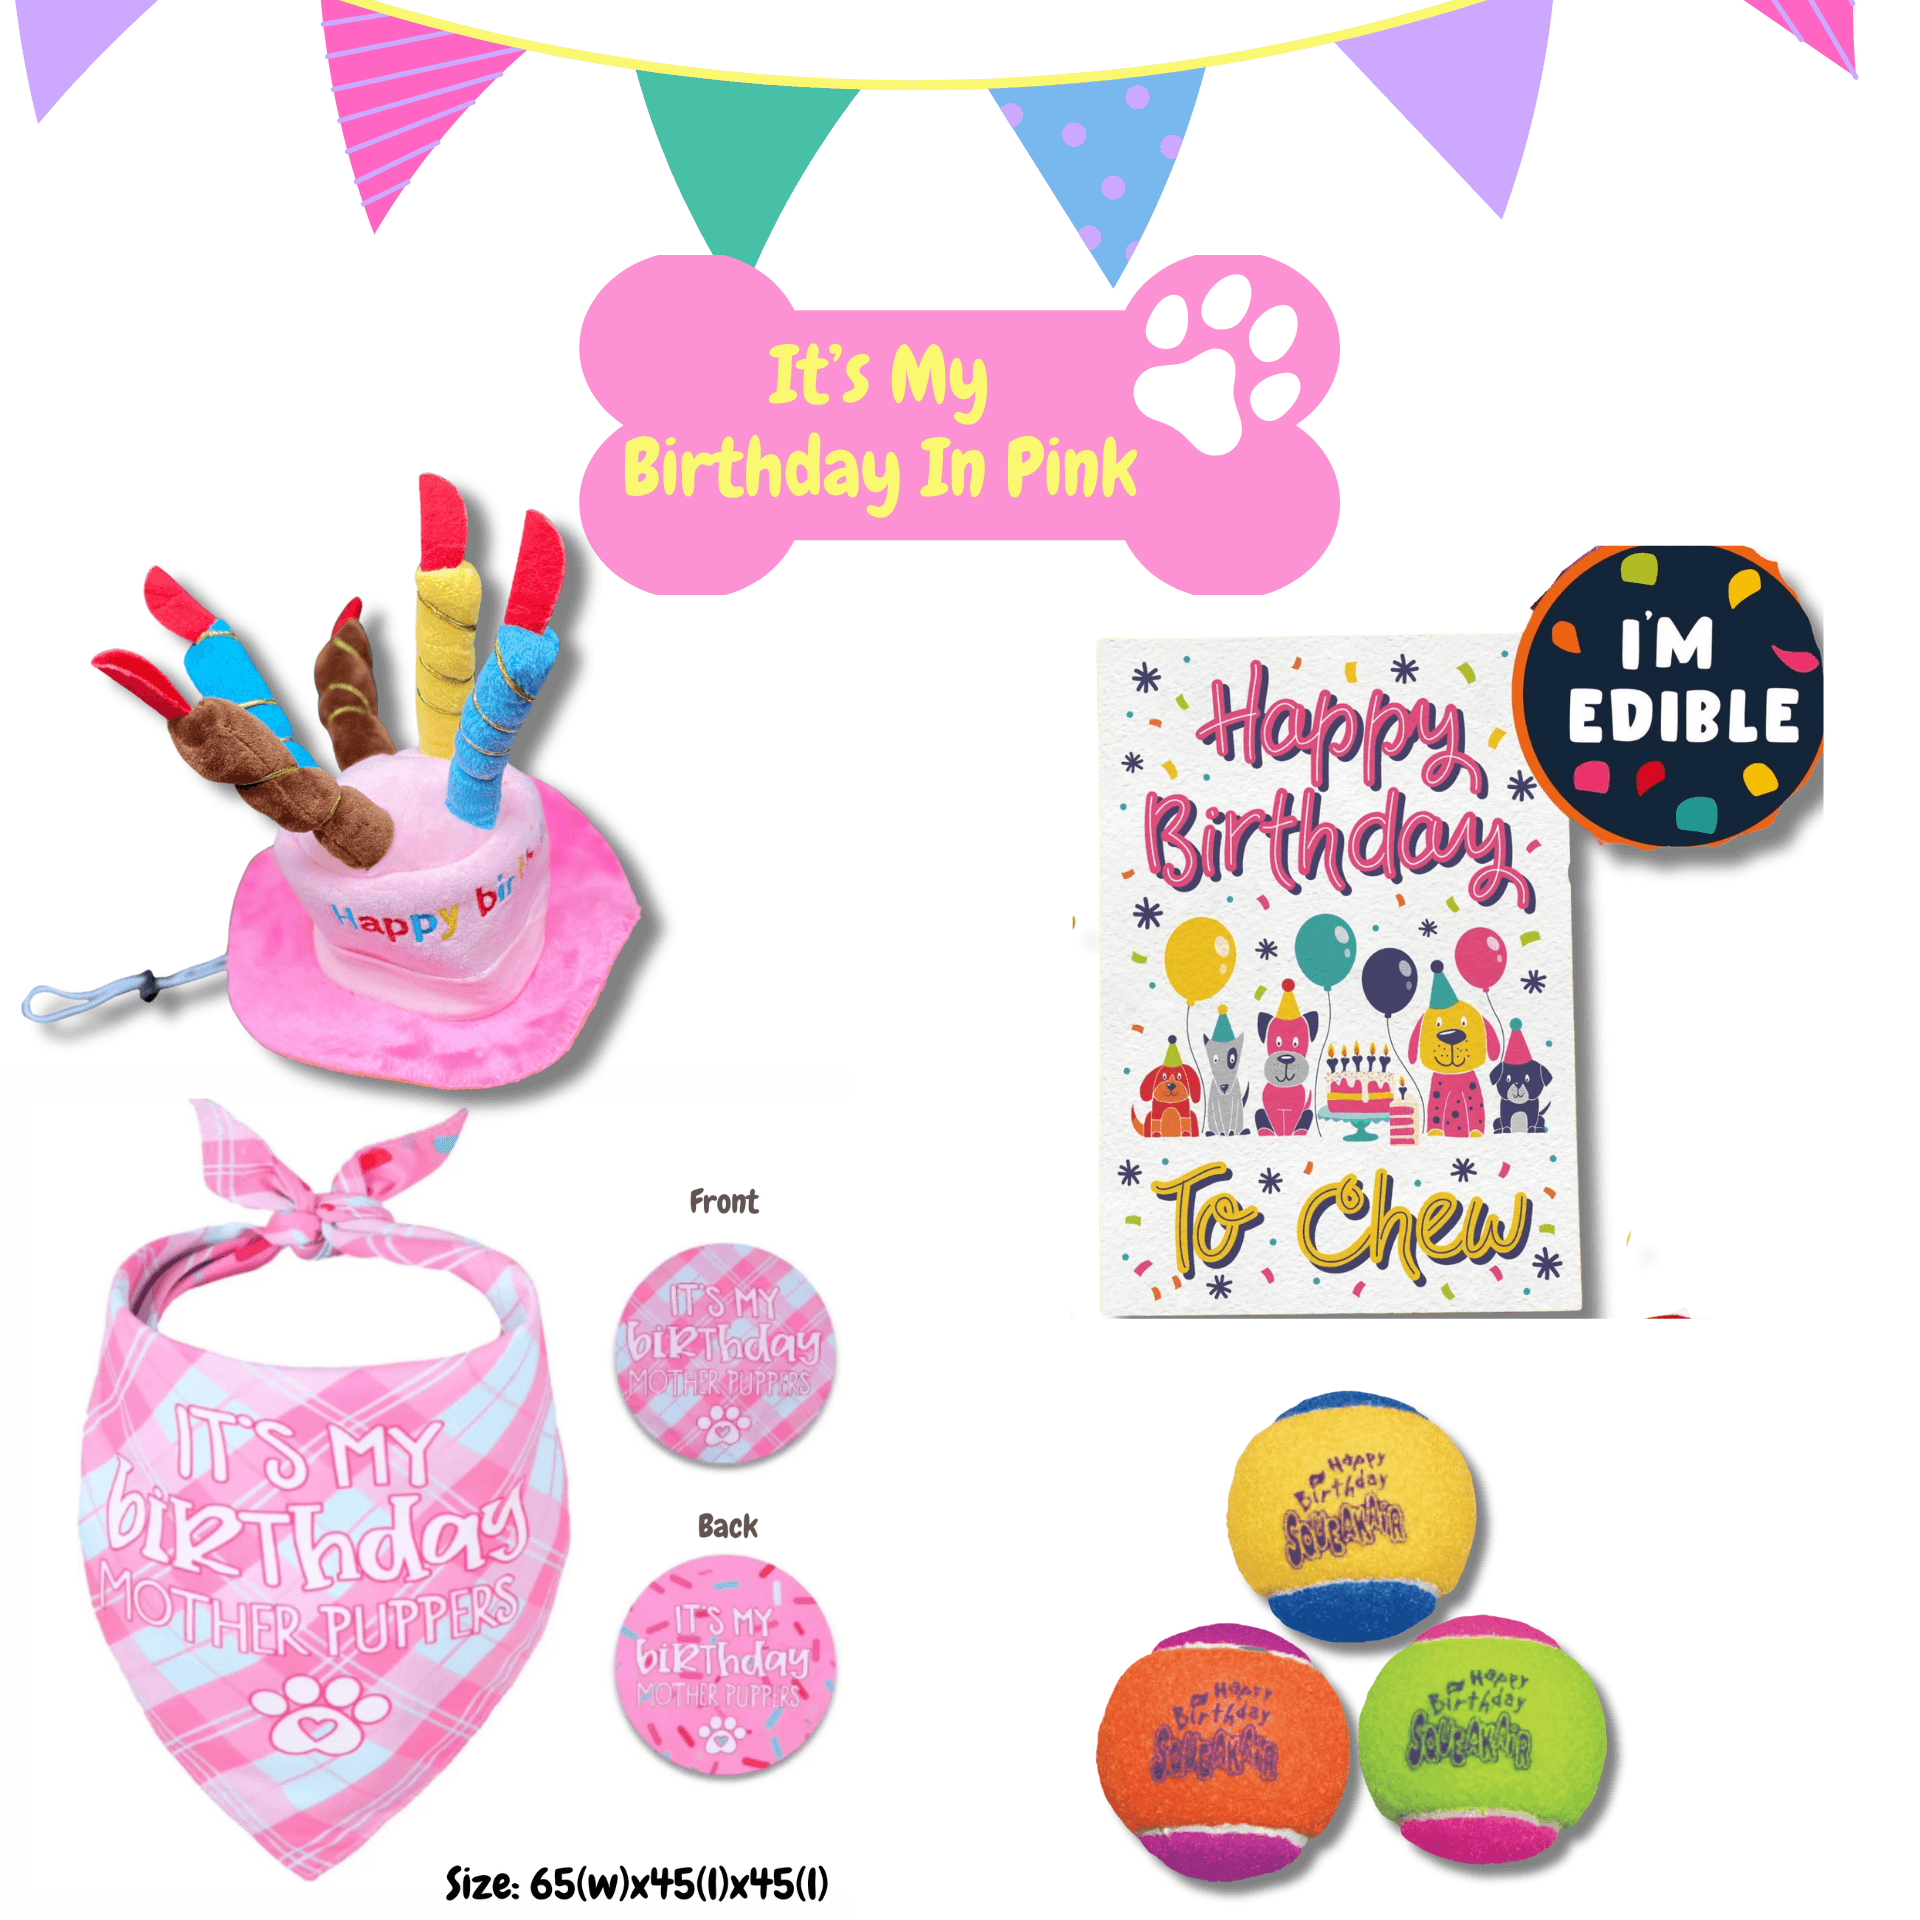 It's my birthday pink themed gift box, let's pawty 